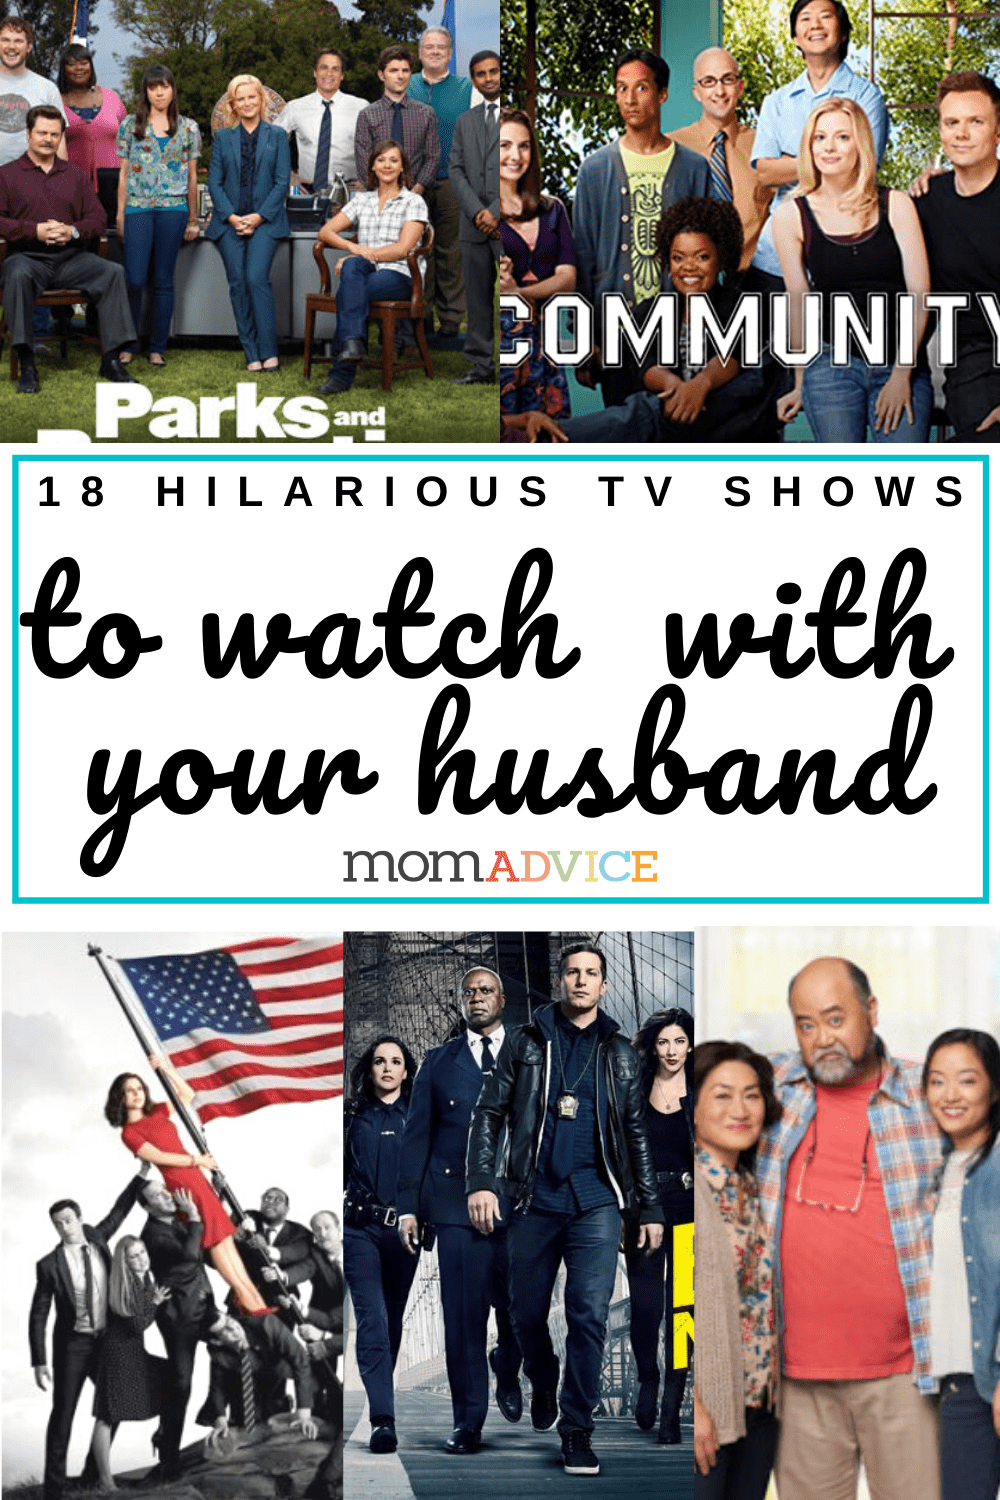 Shows to Watch with Husband - MomAdvice.com